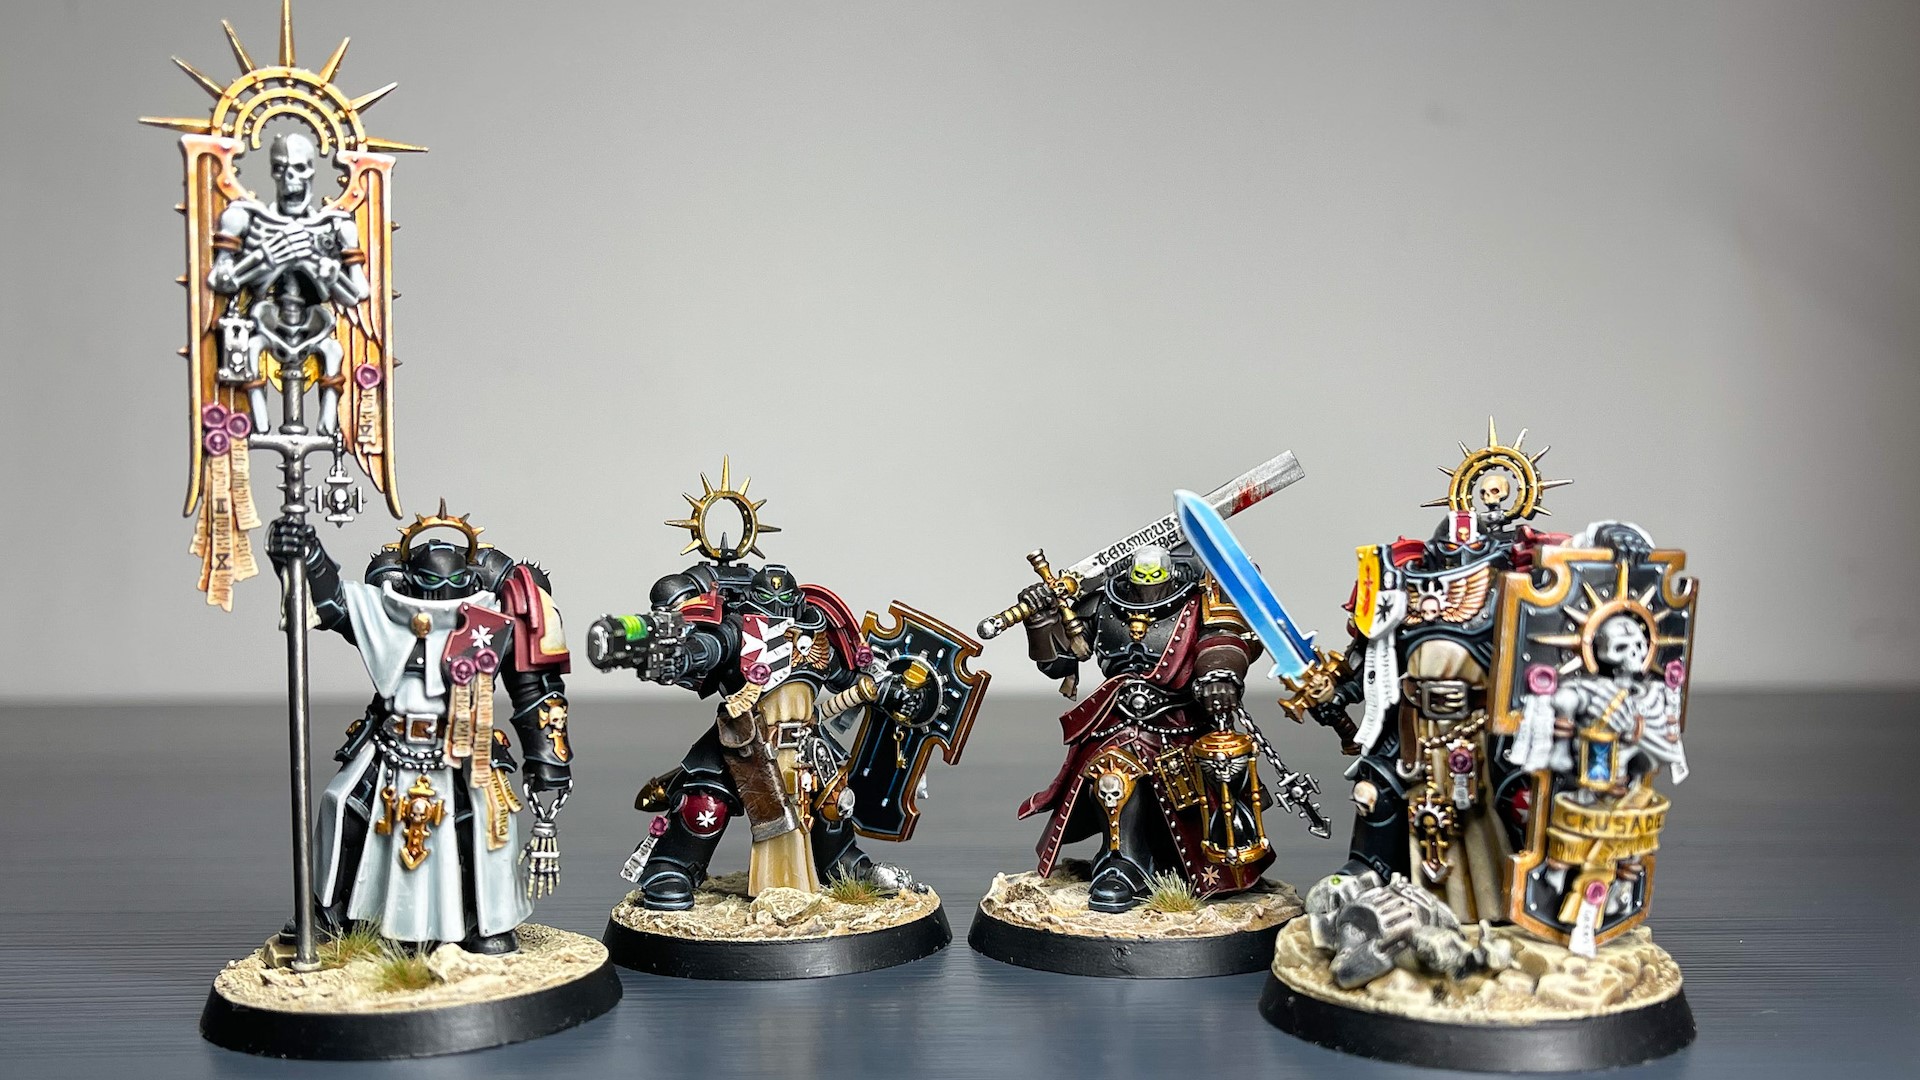 Paint your warhammer 40k miniatures by Alexar__1